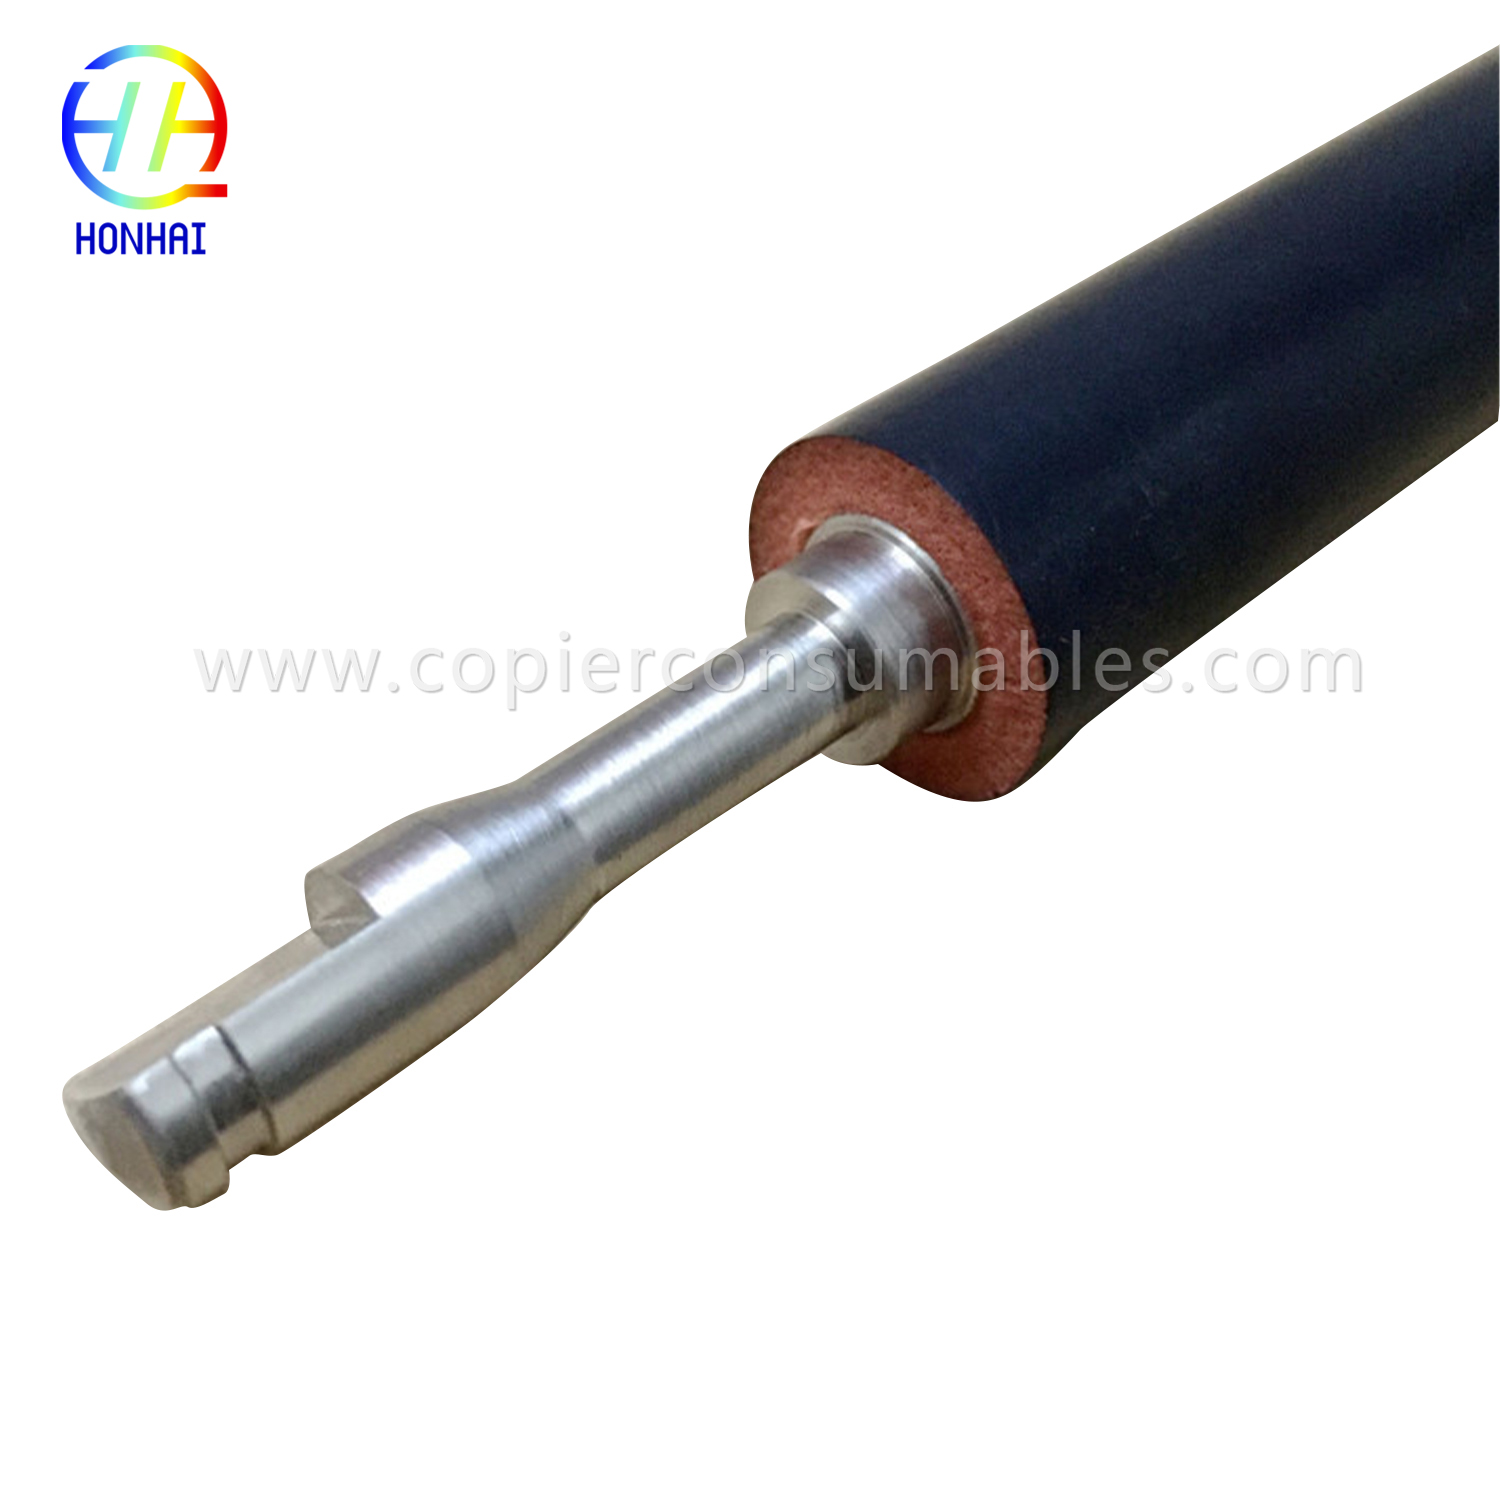 Lower Pressure Roller for HP M1212 M1536 P1606 (2)